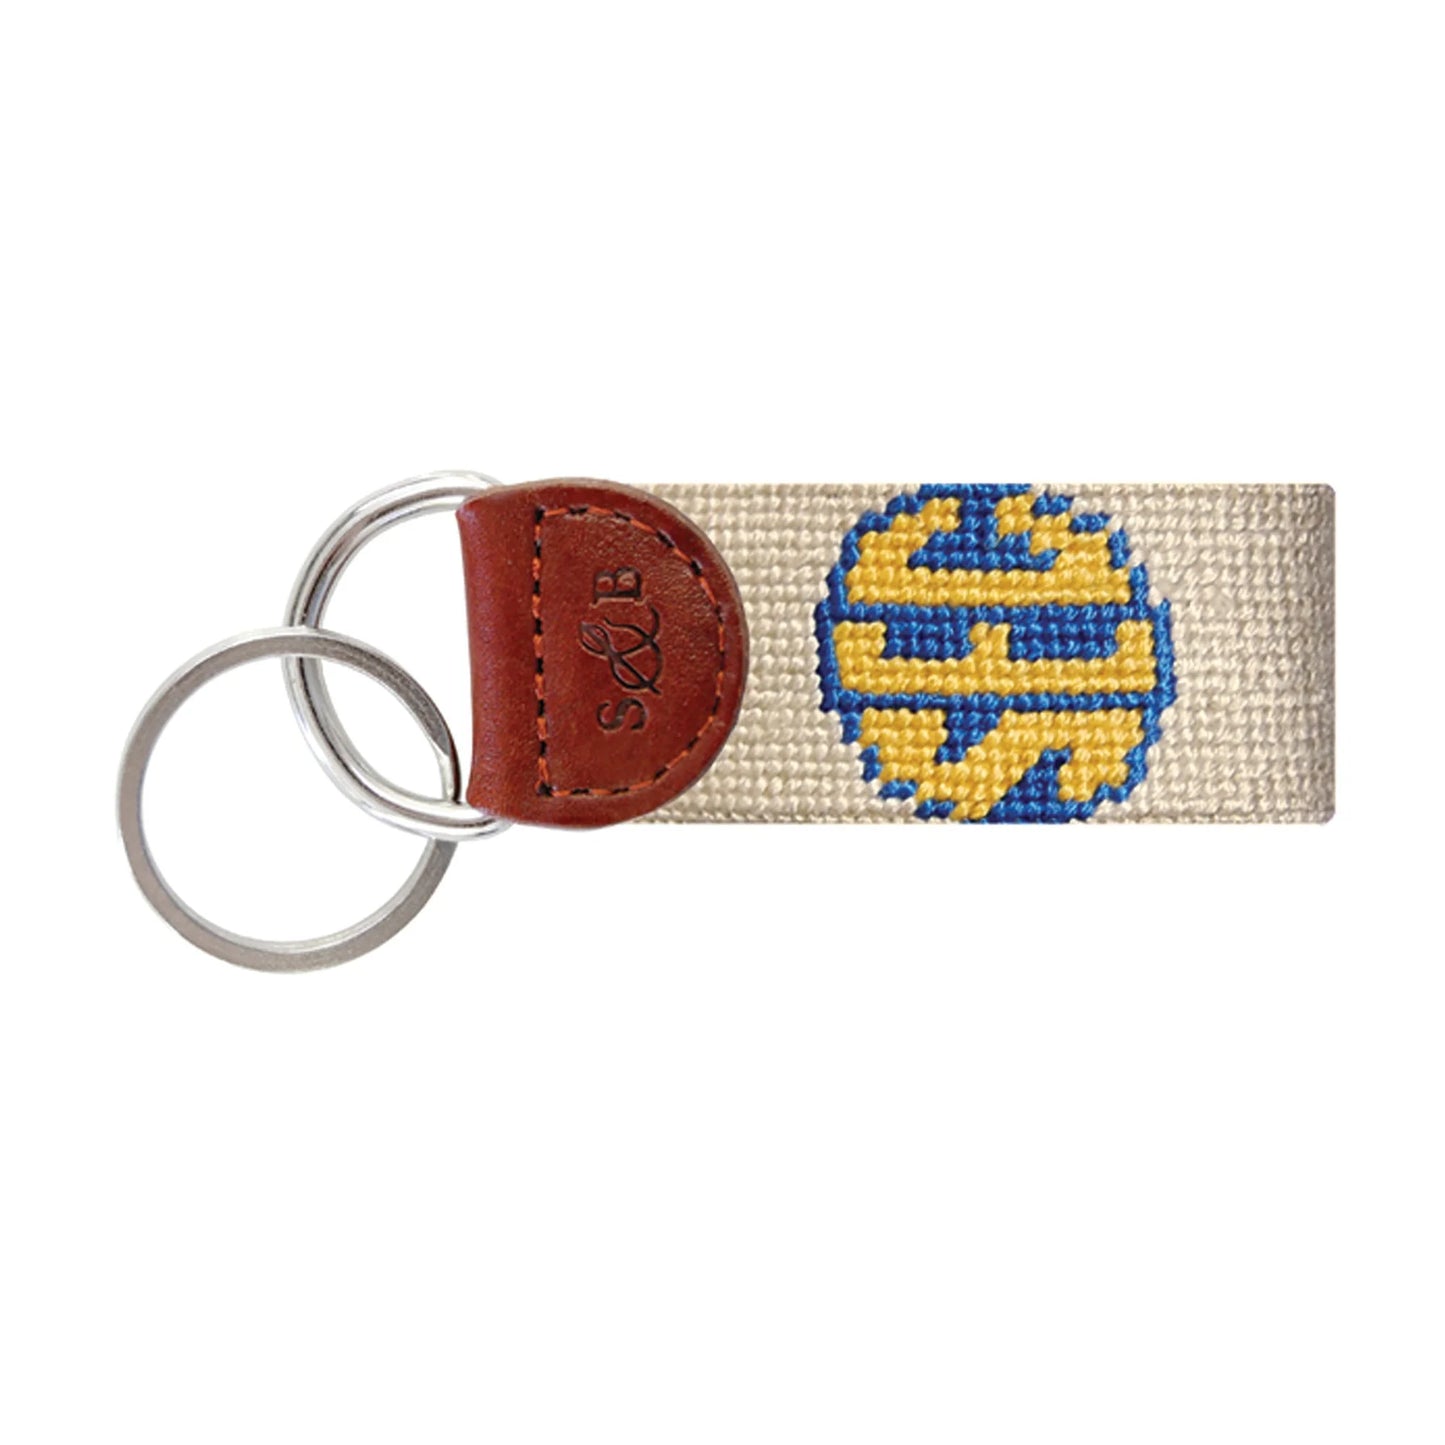 Smathers & Branson Key Fobs (Sports/Outdoors)